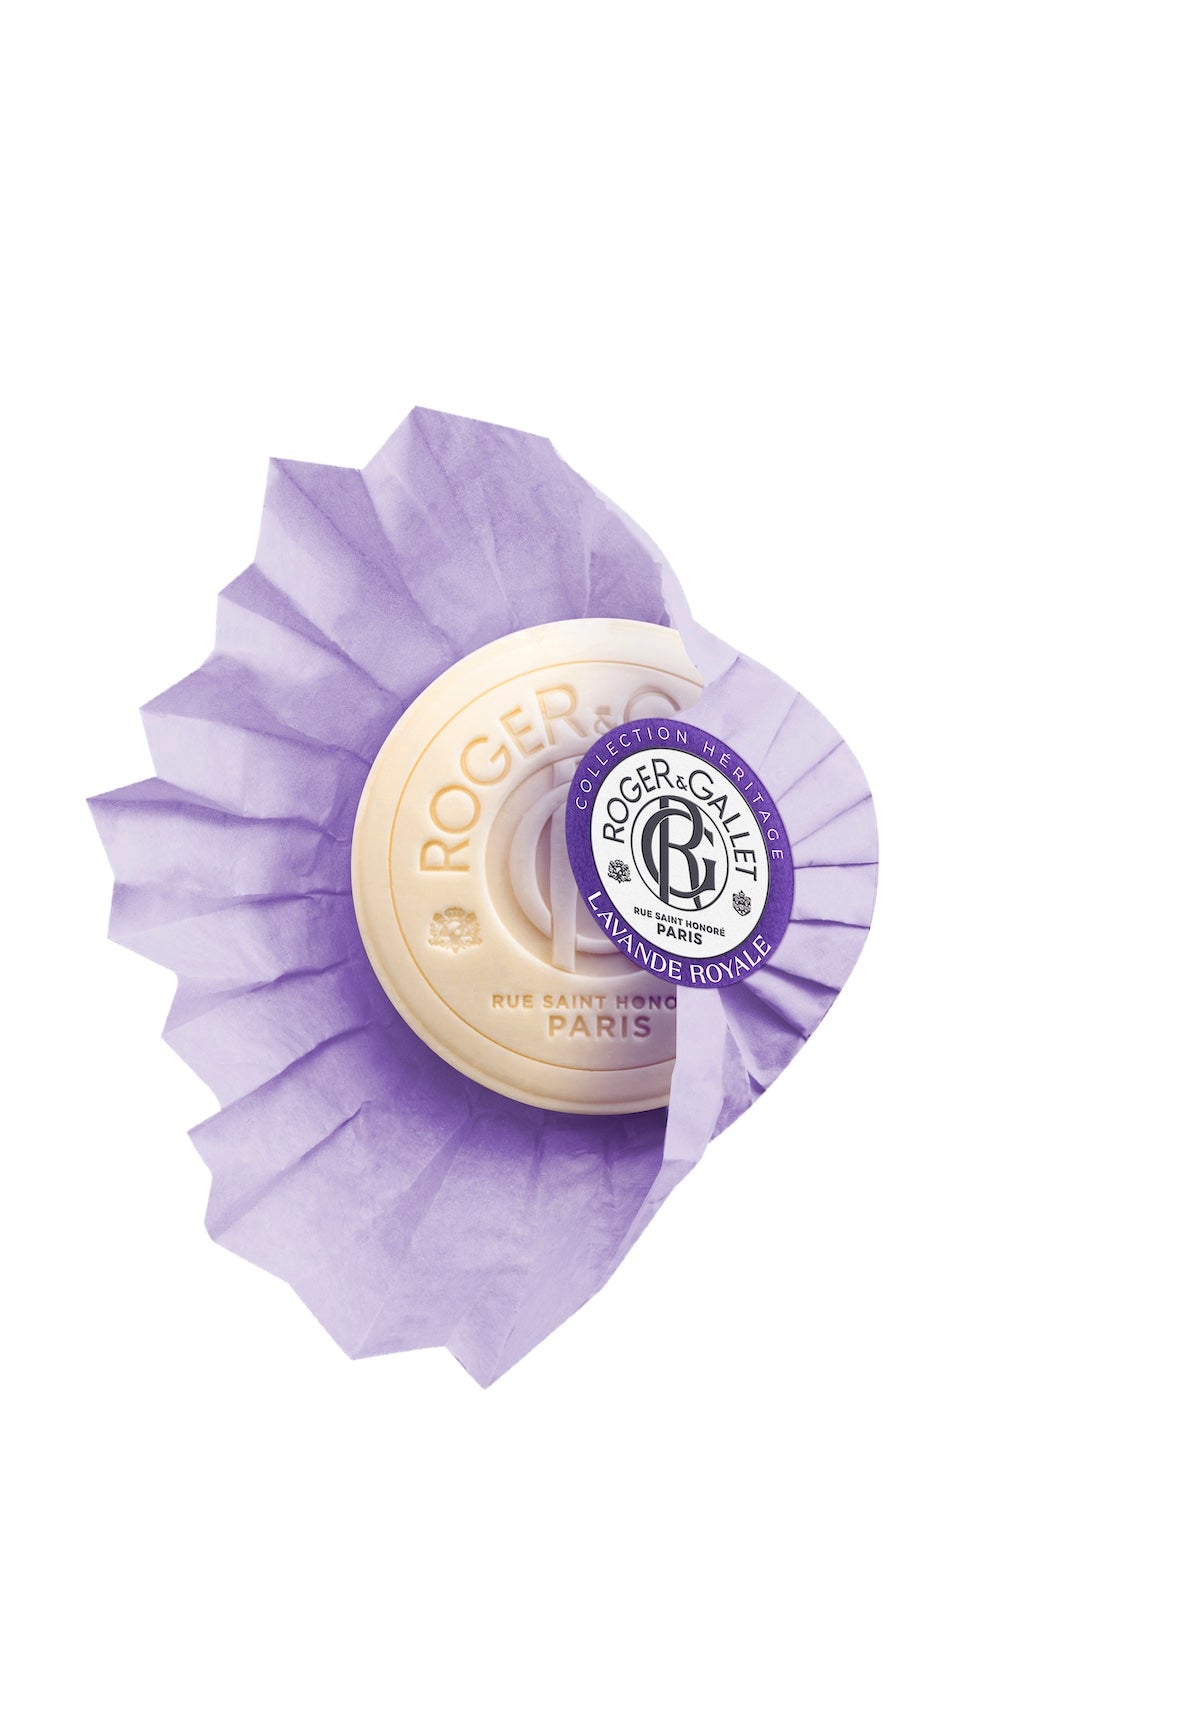 A square soap packaging for Roger & Gallet Royal Lavender - Wellbeing Soap - 3.5 oz with a purple and white color scheme and a detailed black and white seal at the center indicating it is made in France, infused with lavender essential